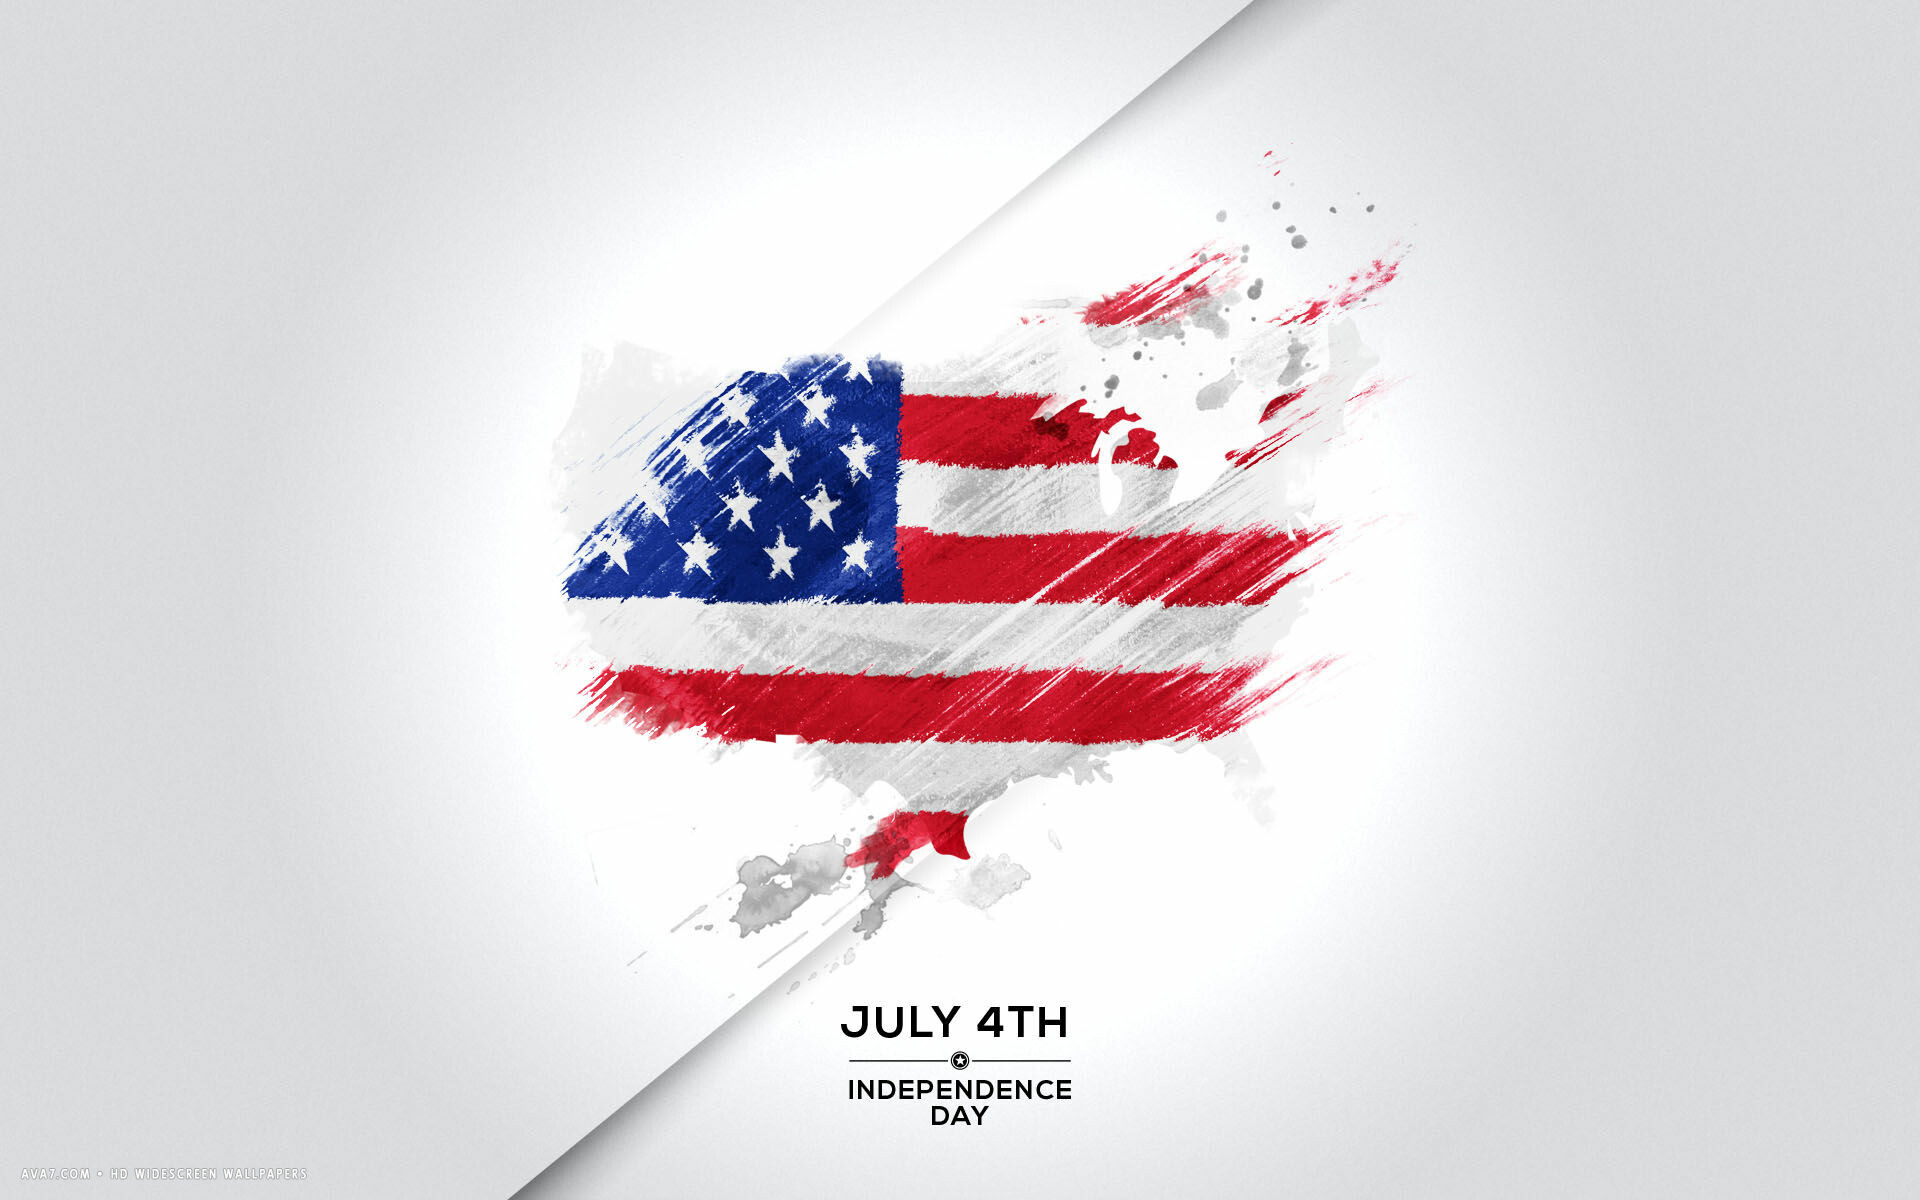 4th of July: Independence Day, The most significant and uniquely American holiday. 1920x1200 HD Wallpaper.